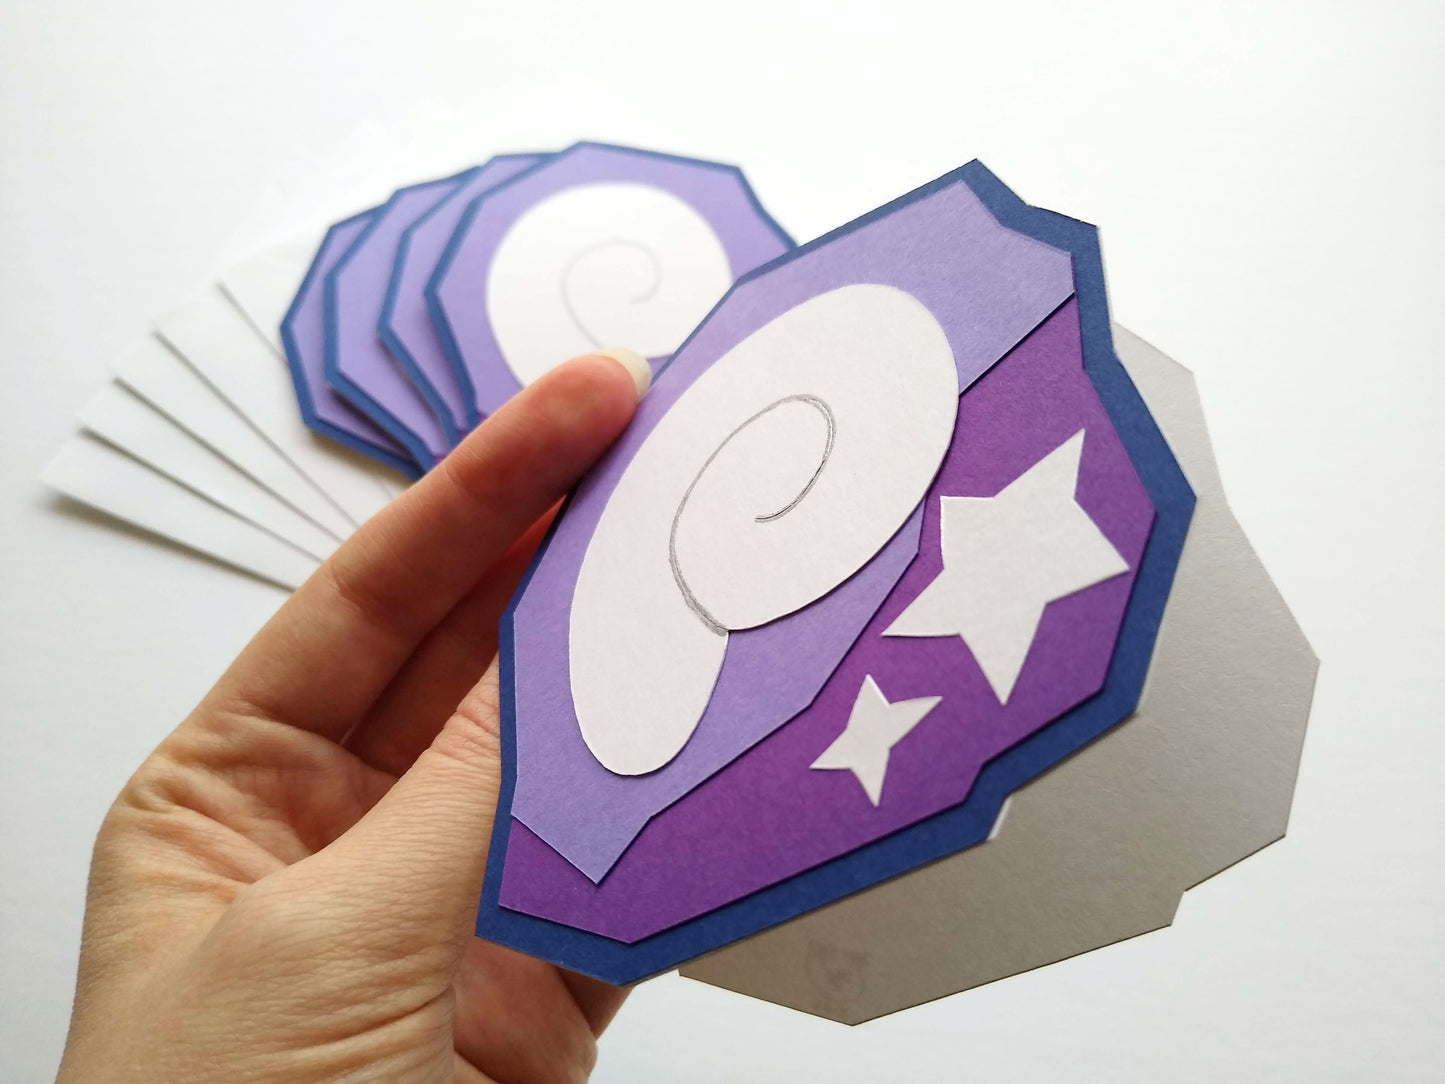 In the foreground is a hand holding a single card to the camera, opened slightly to show the white inside. The card is designed to look like a shell and two stars stuck inside a purple rock, like fossils. Four fossil cards are stacked on white envelopes in the background.